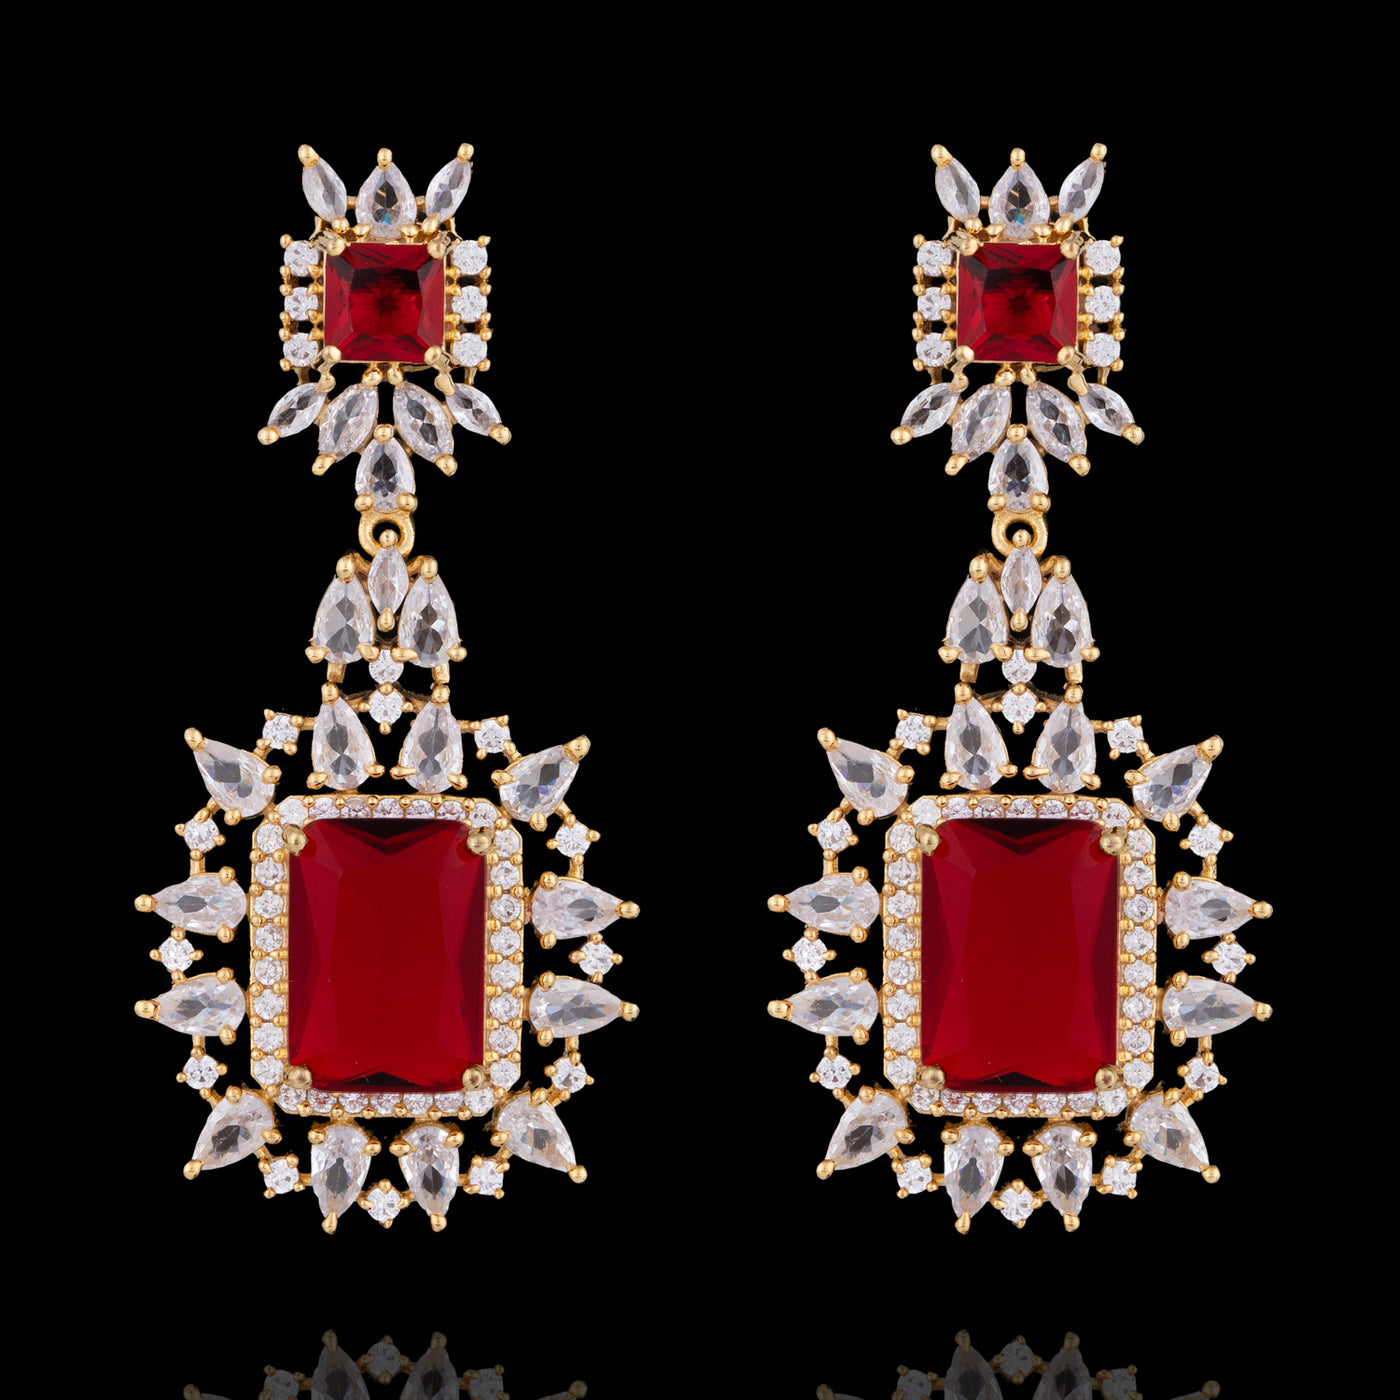 Julie Set Ruby - Available in 3 Plating Options